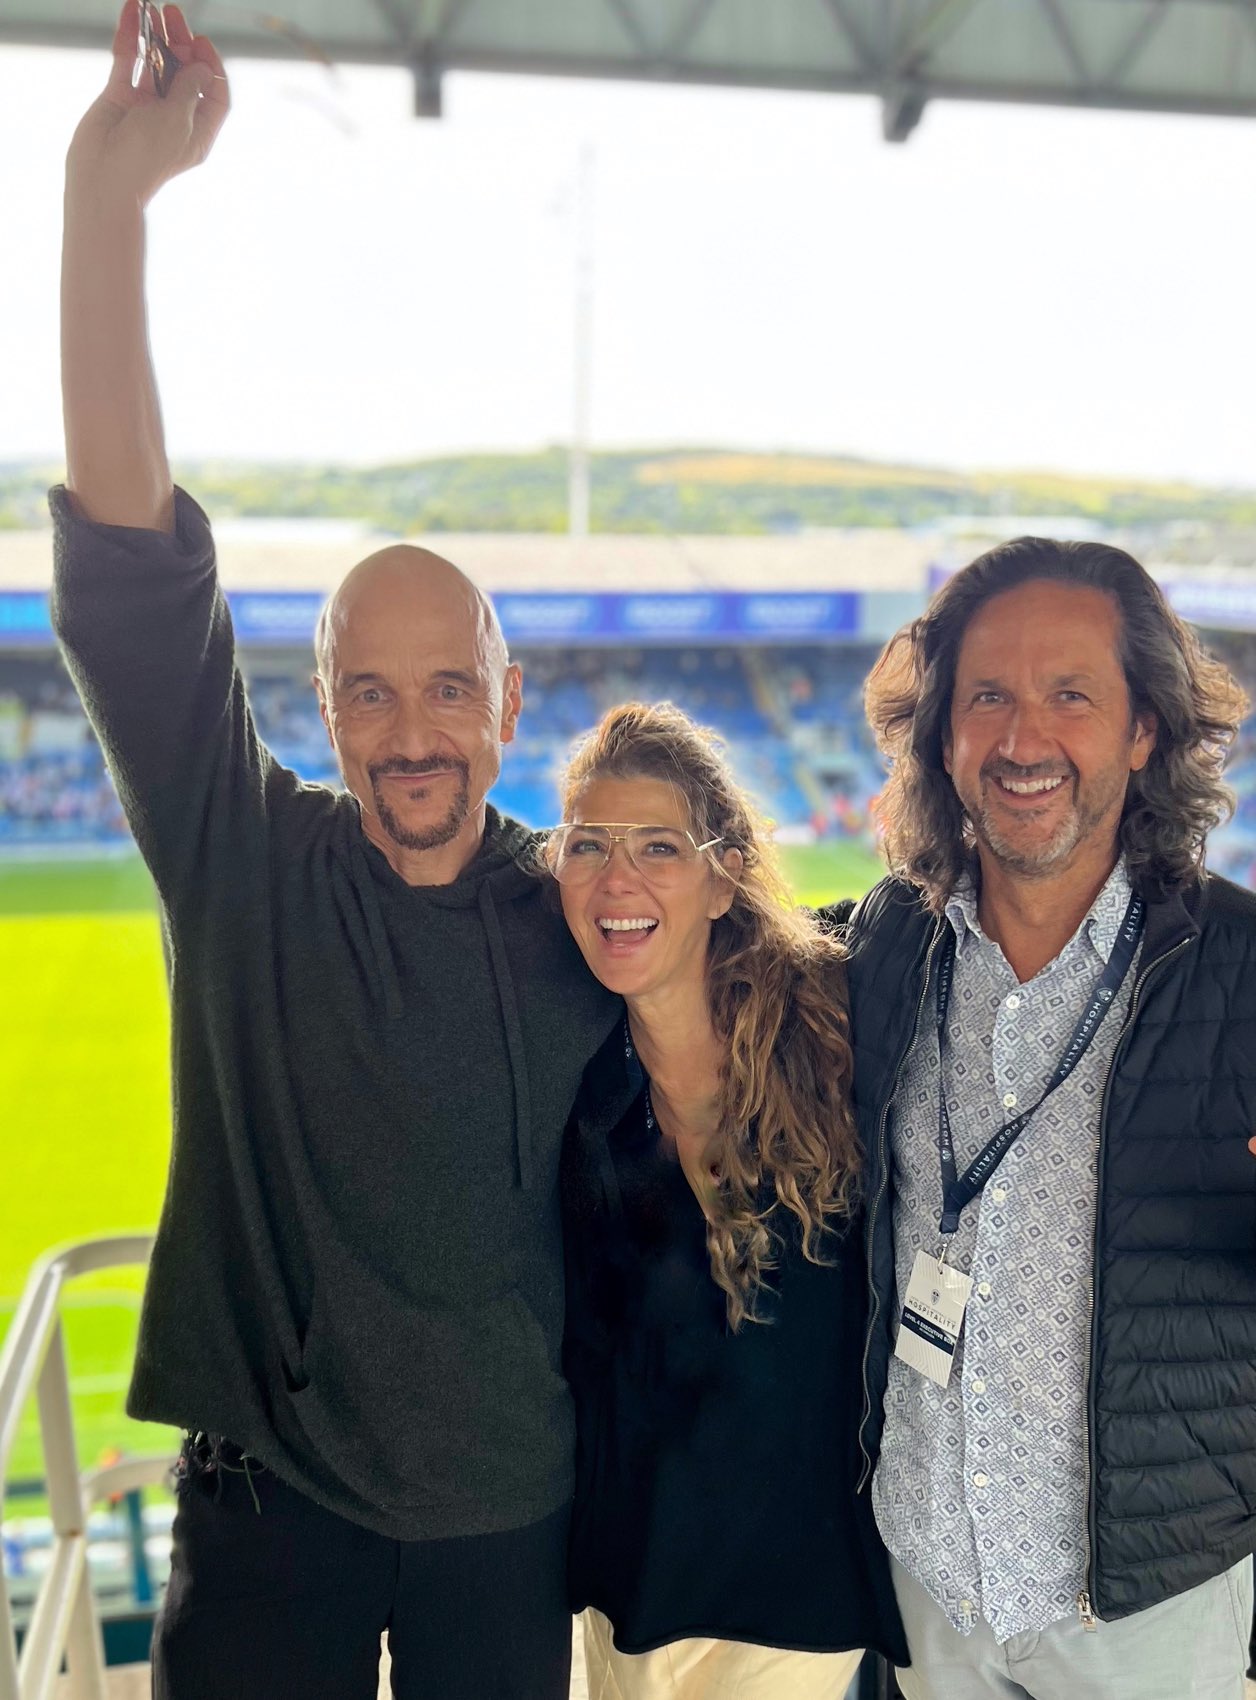 Tim Booth on Twitter: "Went to a game of football on Sunday with a of friends. It was ⁦@marisatomei⁩ 's first game. I told her we were likely to be